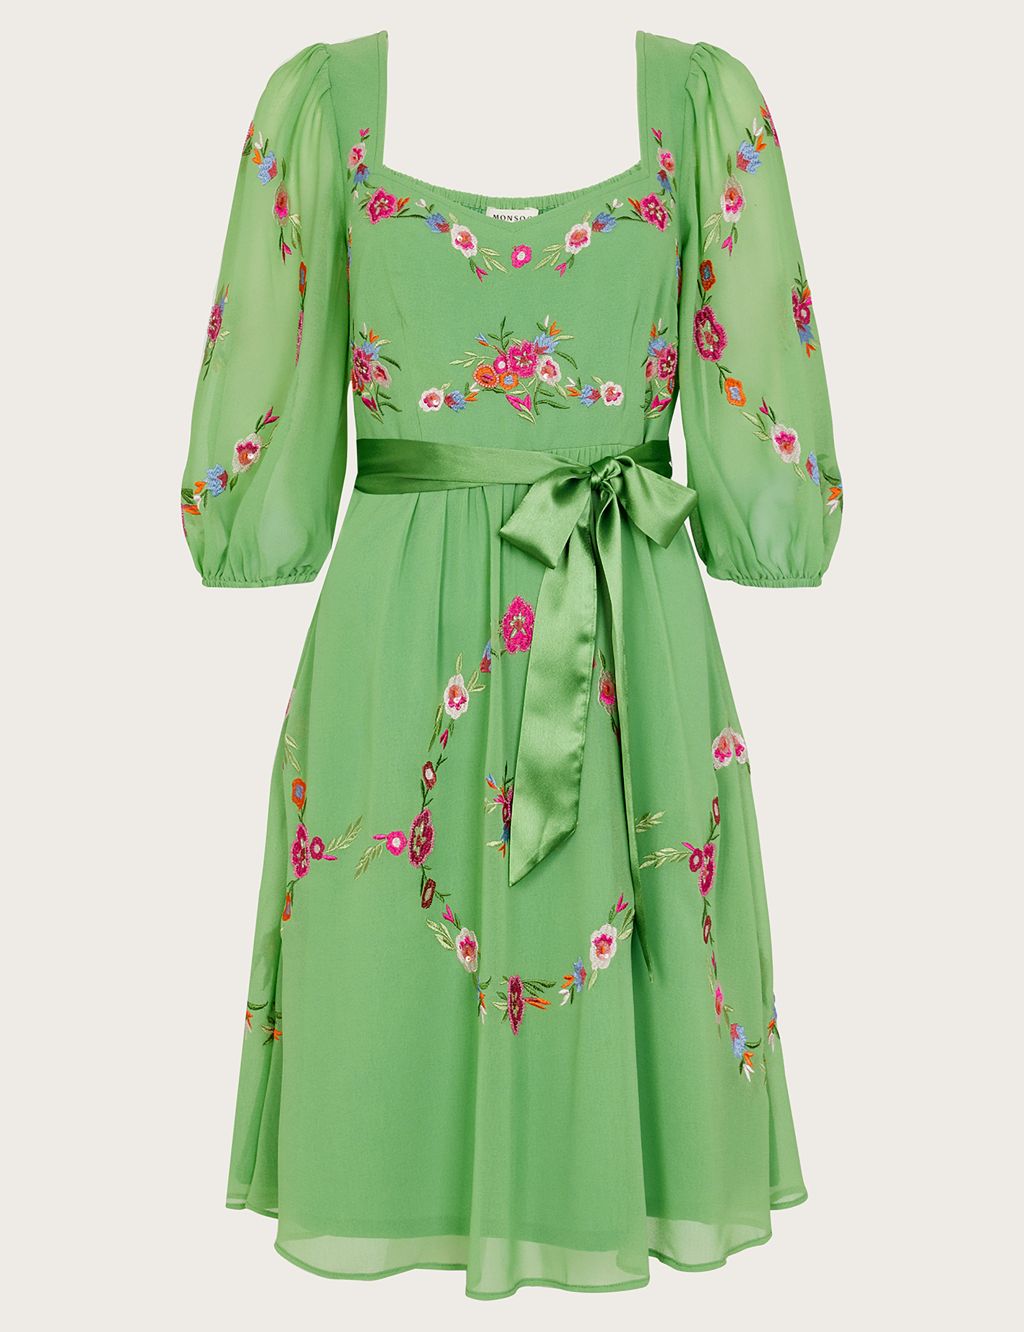 Floral Embroidered Square Neck Waisted Dress image 2